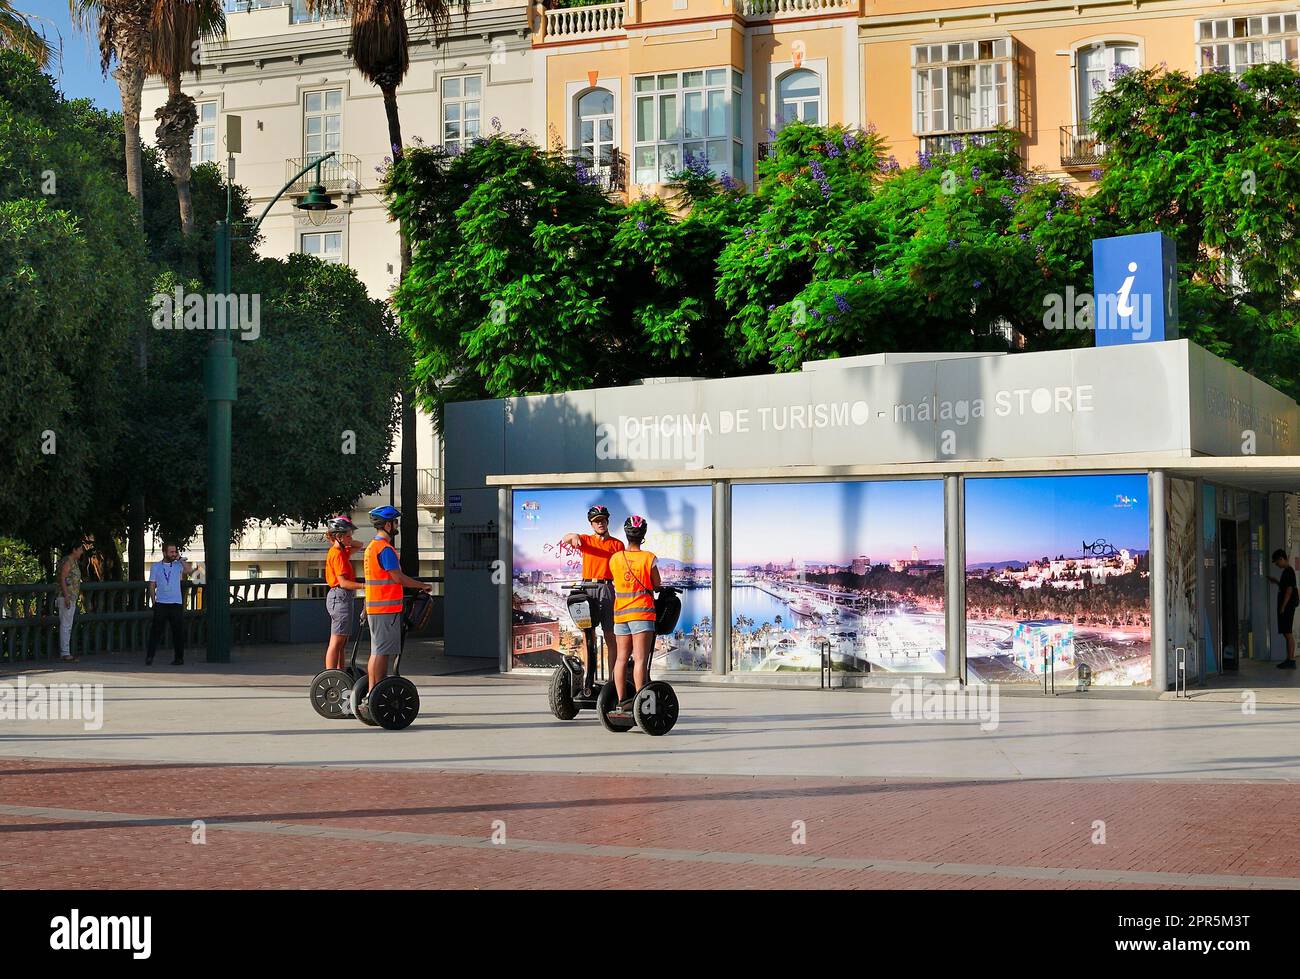 A group of tourists receiving instructions on using segway two wheeled electric vehicles outside Malaga city tourist office Stock Photo